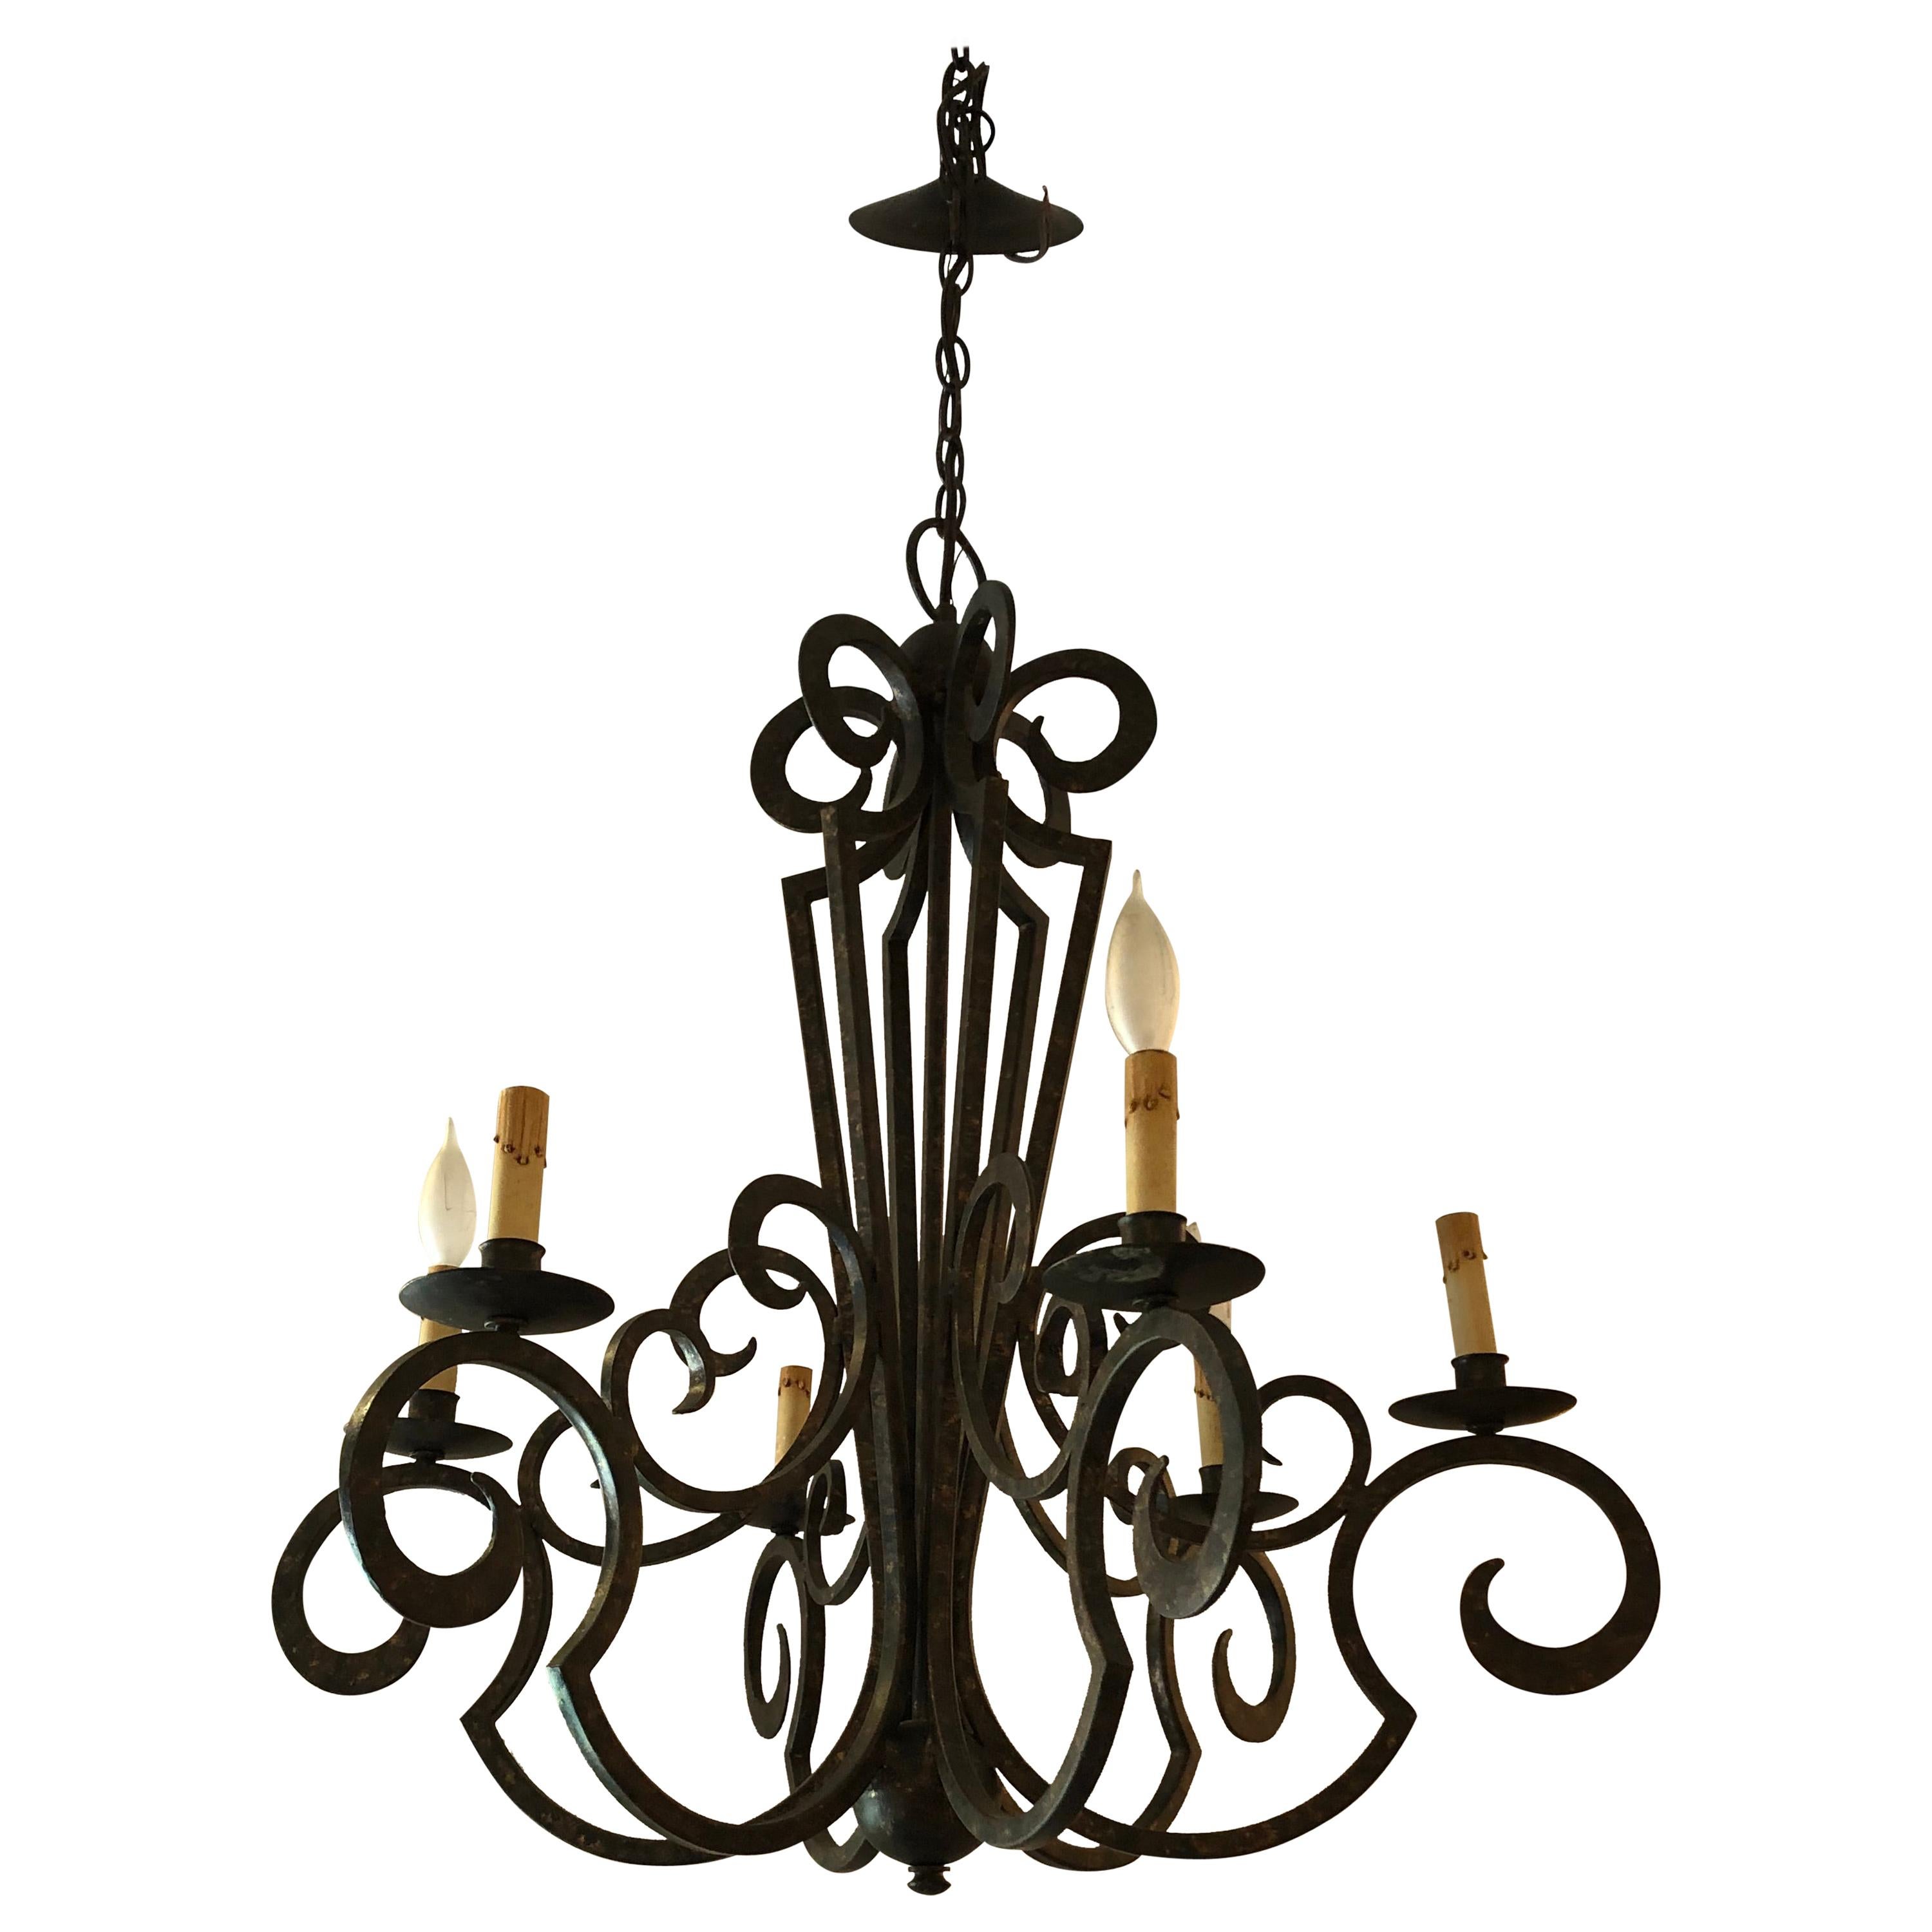 Smashing Dark Brown and Gilded Wrought Iron Chandelier